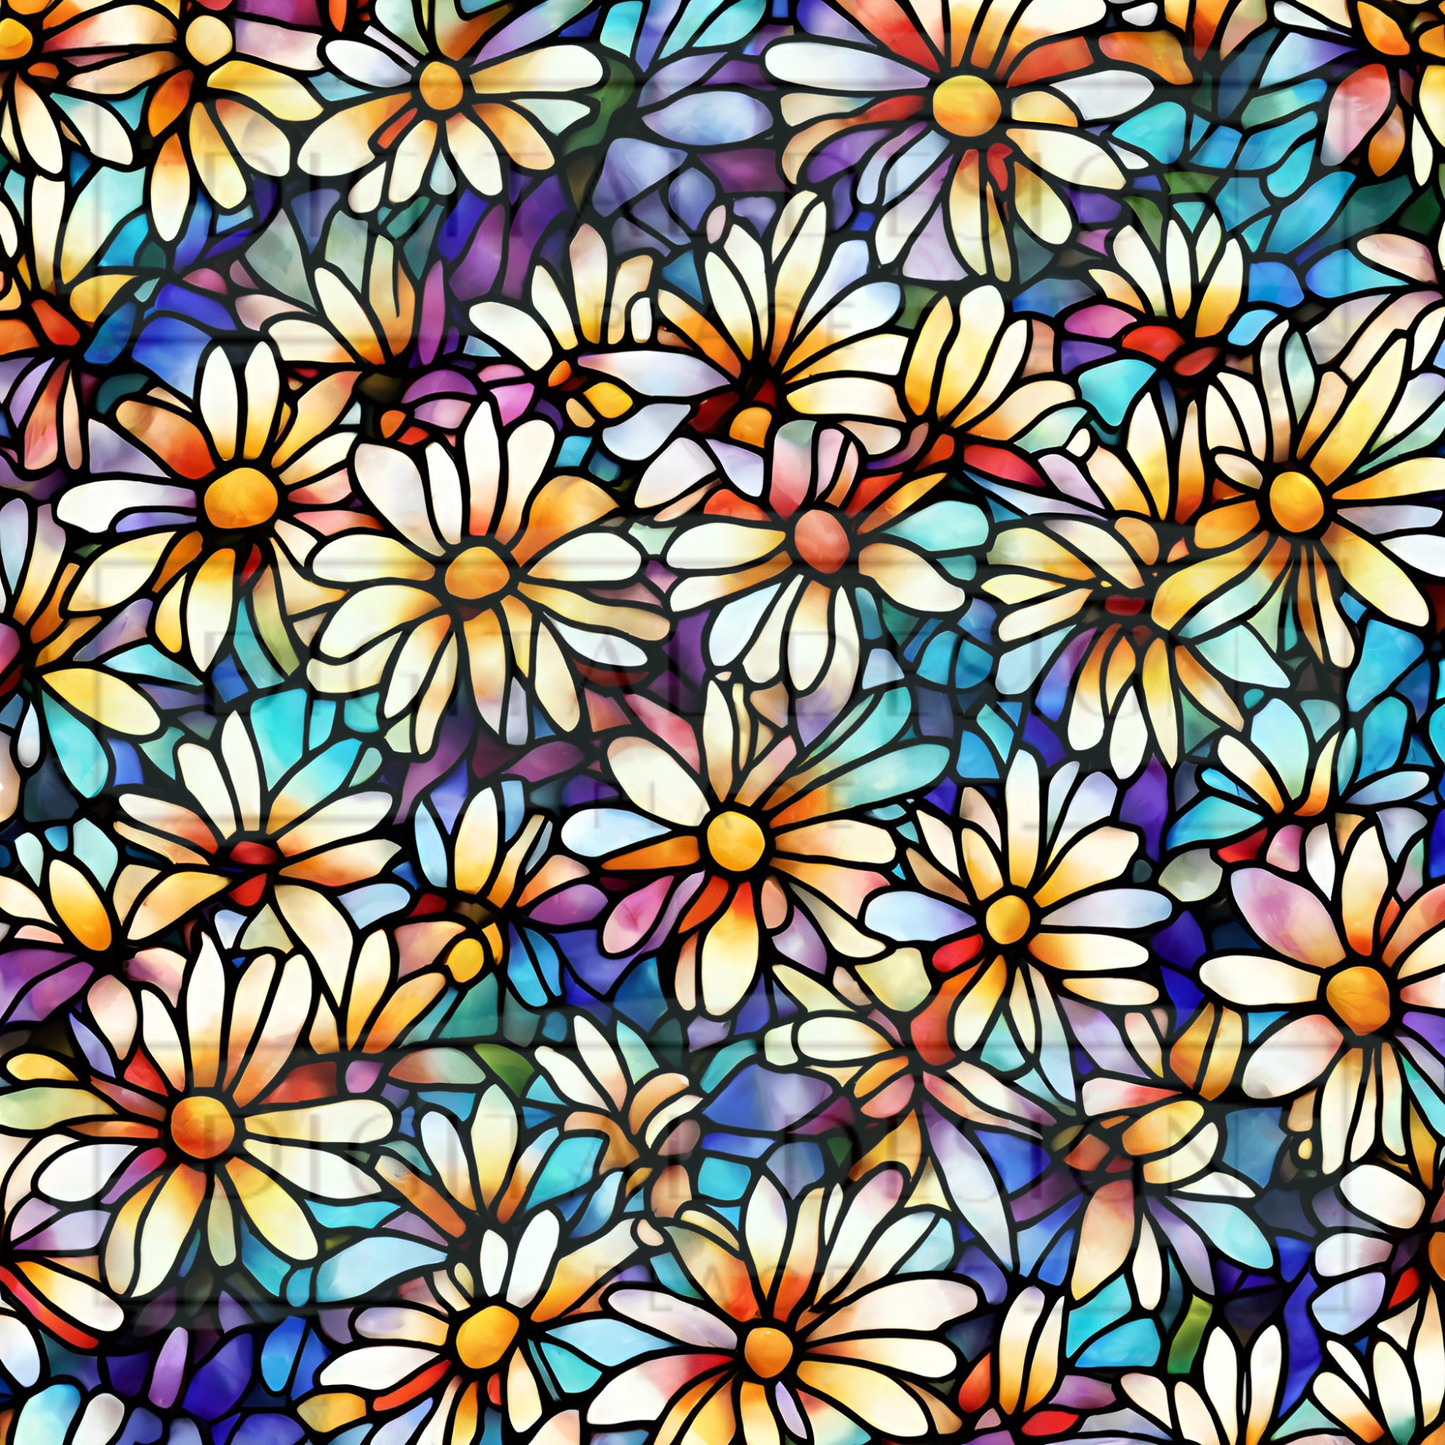 Stained Glass Watercolor Daisy VinylV1054